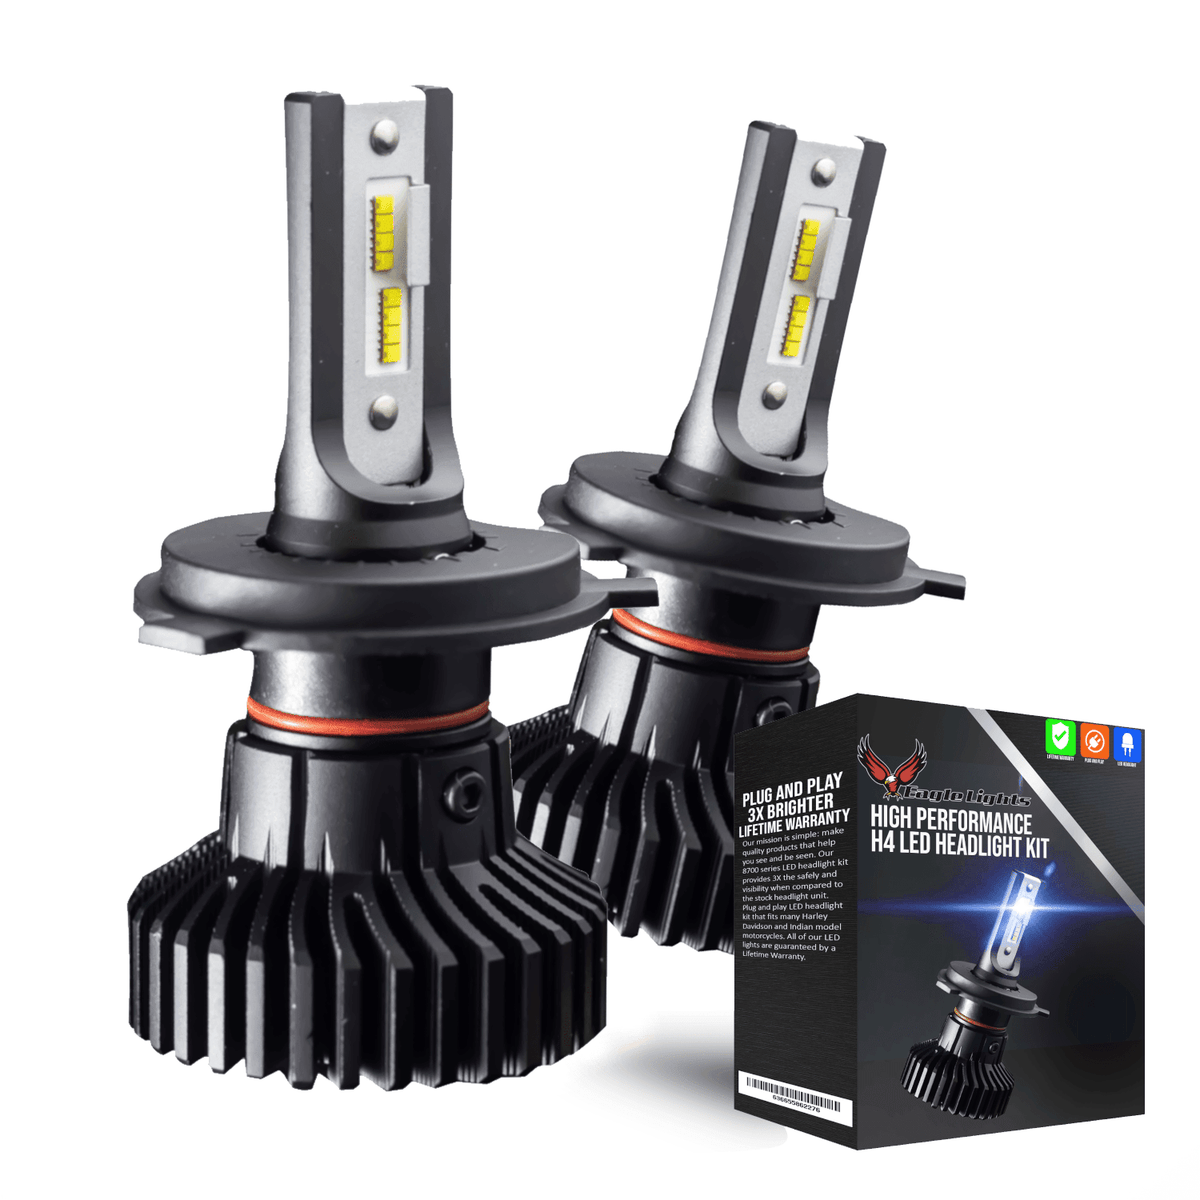 Eagle Lights Infinity Beam H11 LED Headlight Bulb for BMW Motorcycles - 2 Pack (High and Low Beam)